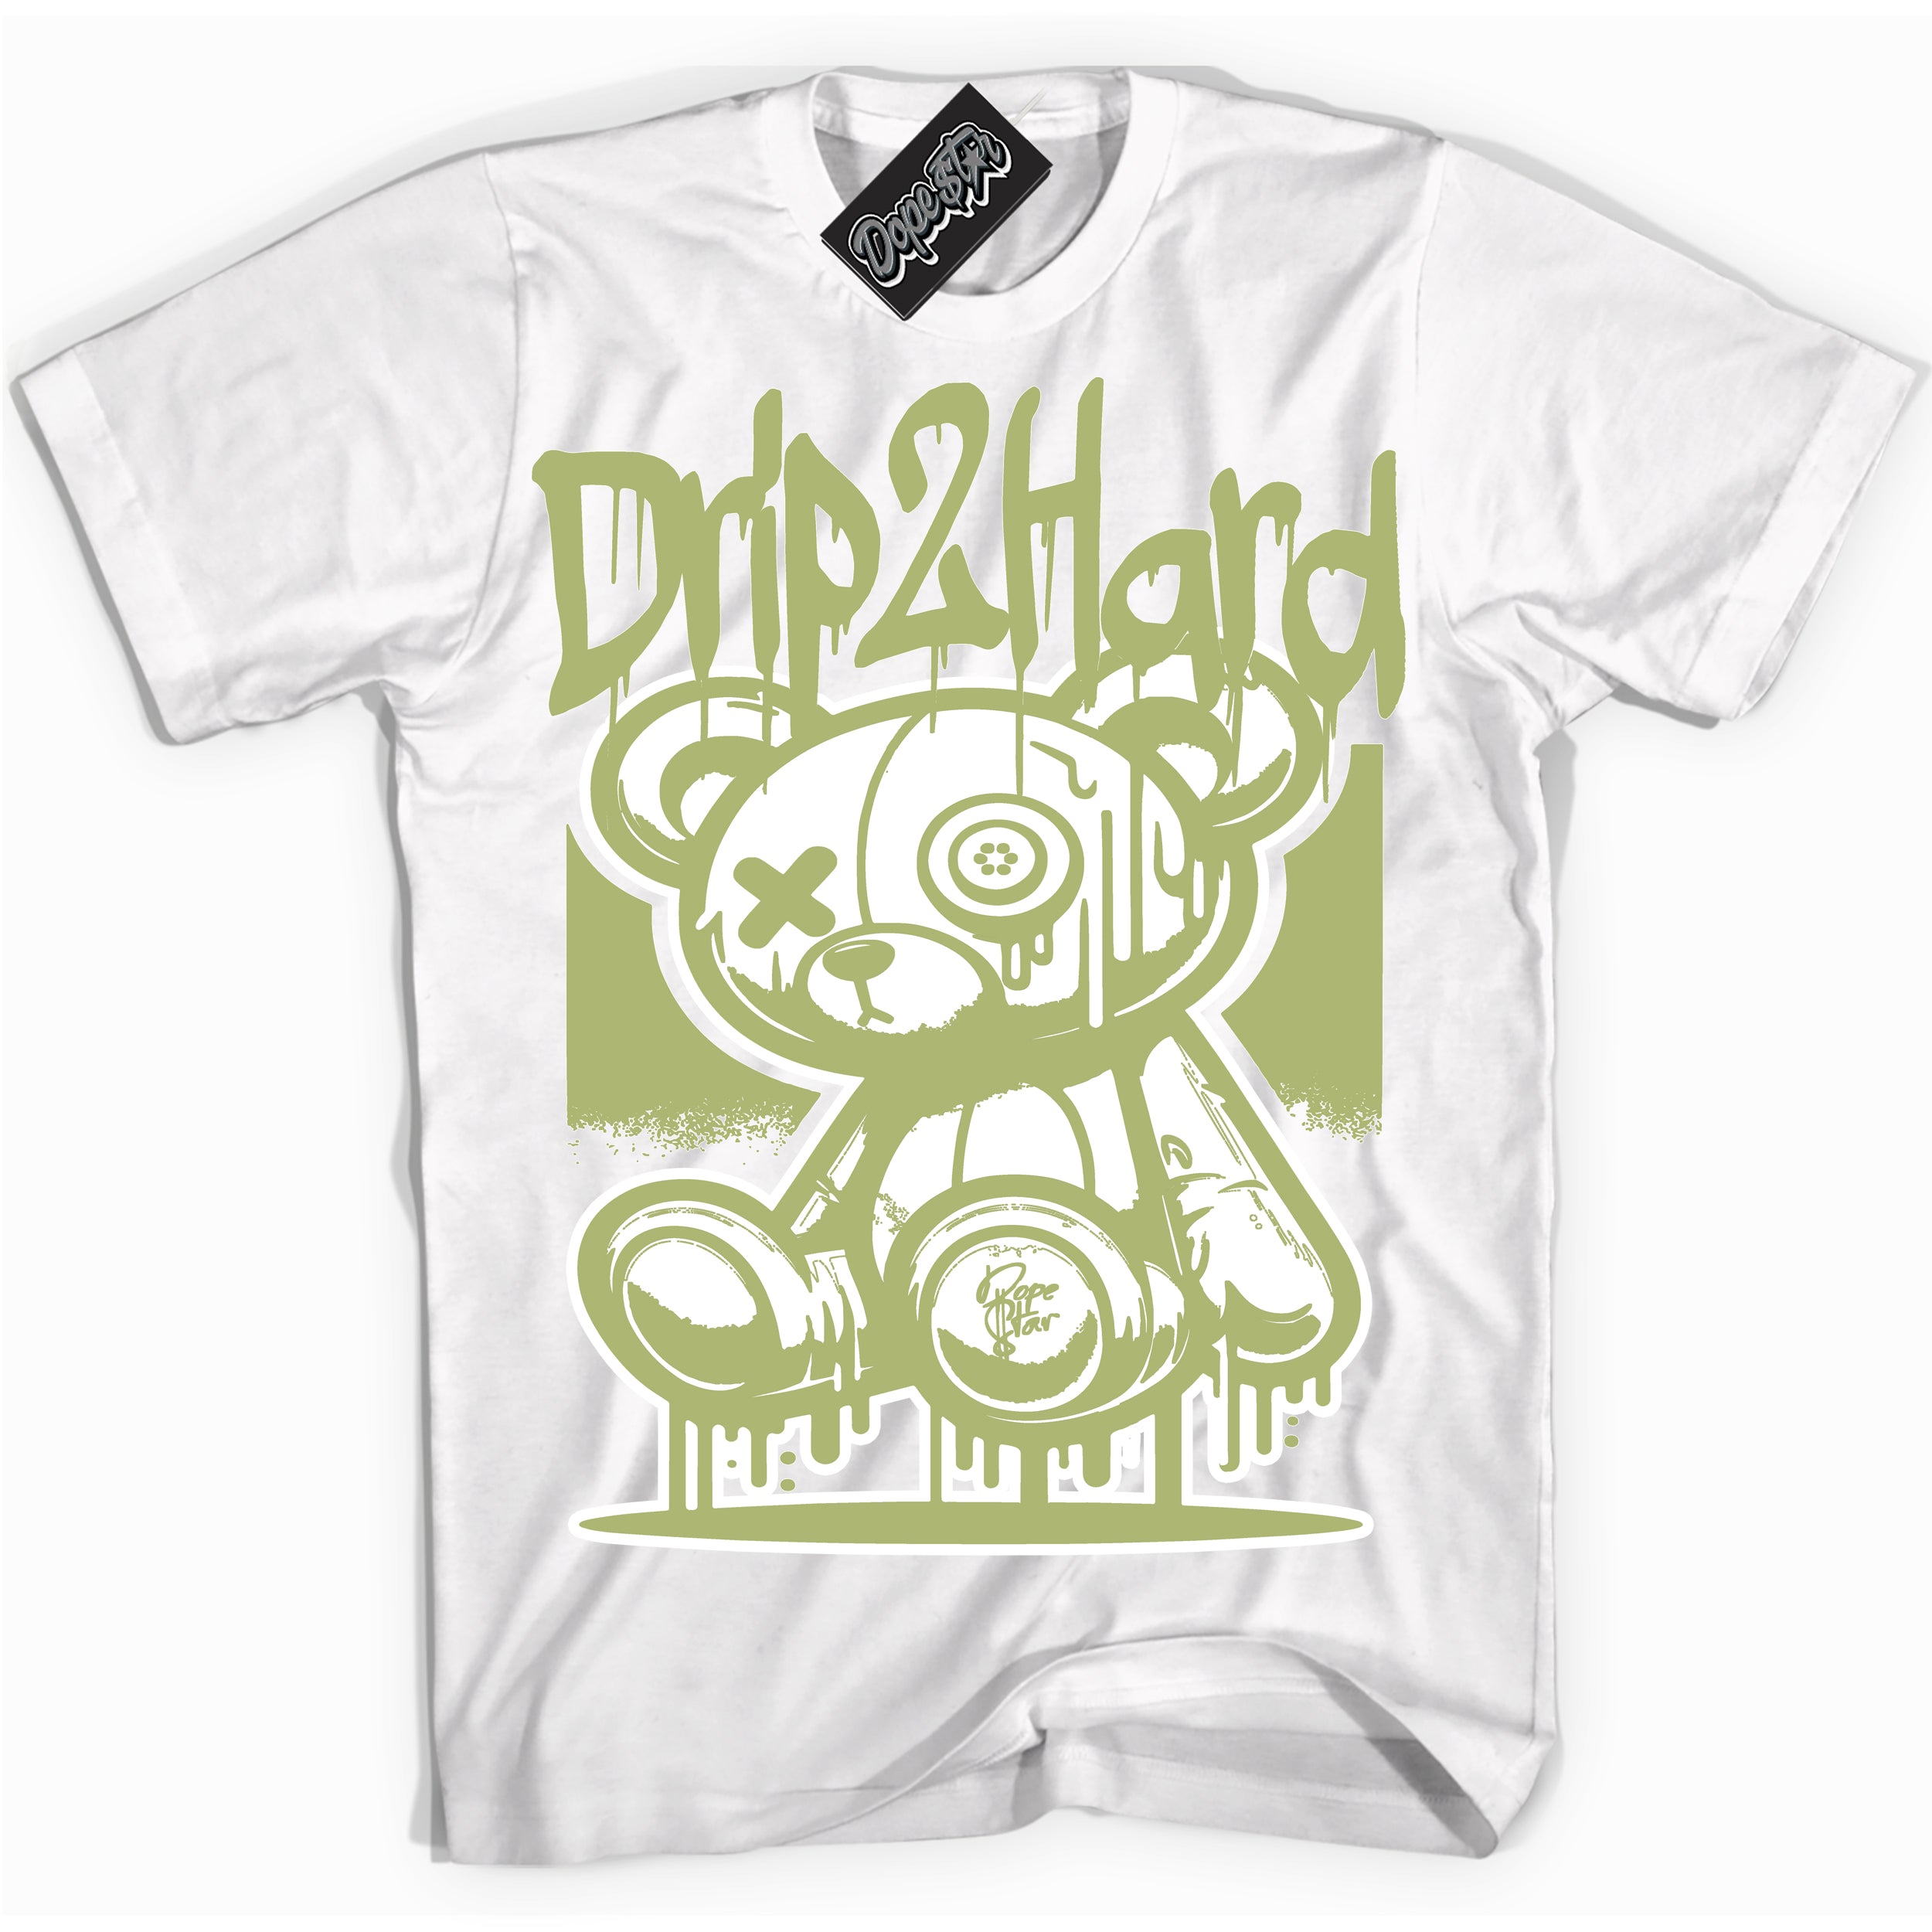 Cool White graphic tee with “ Drip 2 Hard ” design, that perfectly matches Green Python 1s